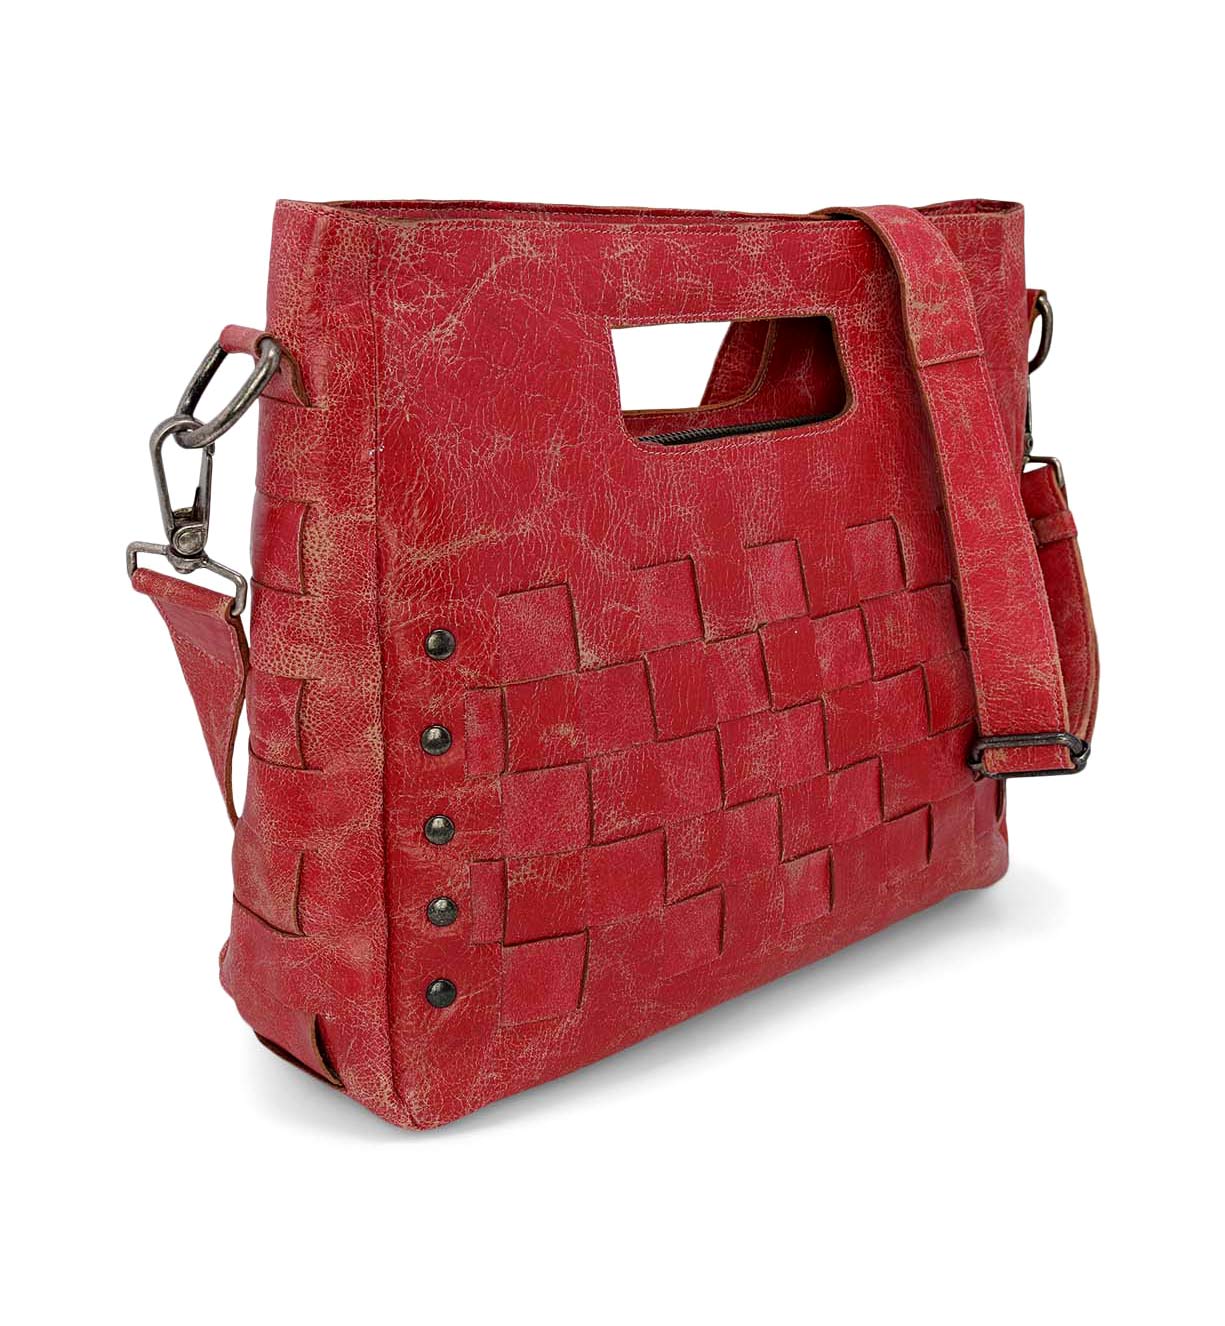 A distressed red Orchid handbag by Bed Stu with a strap.